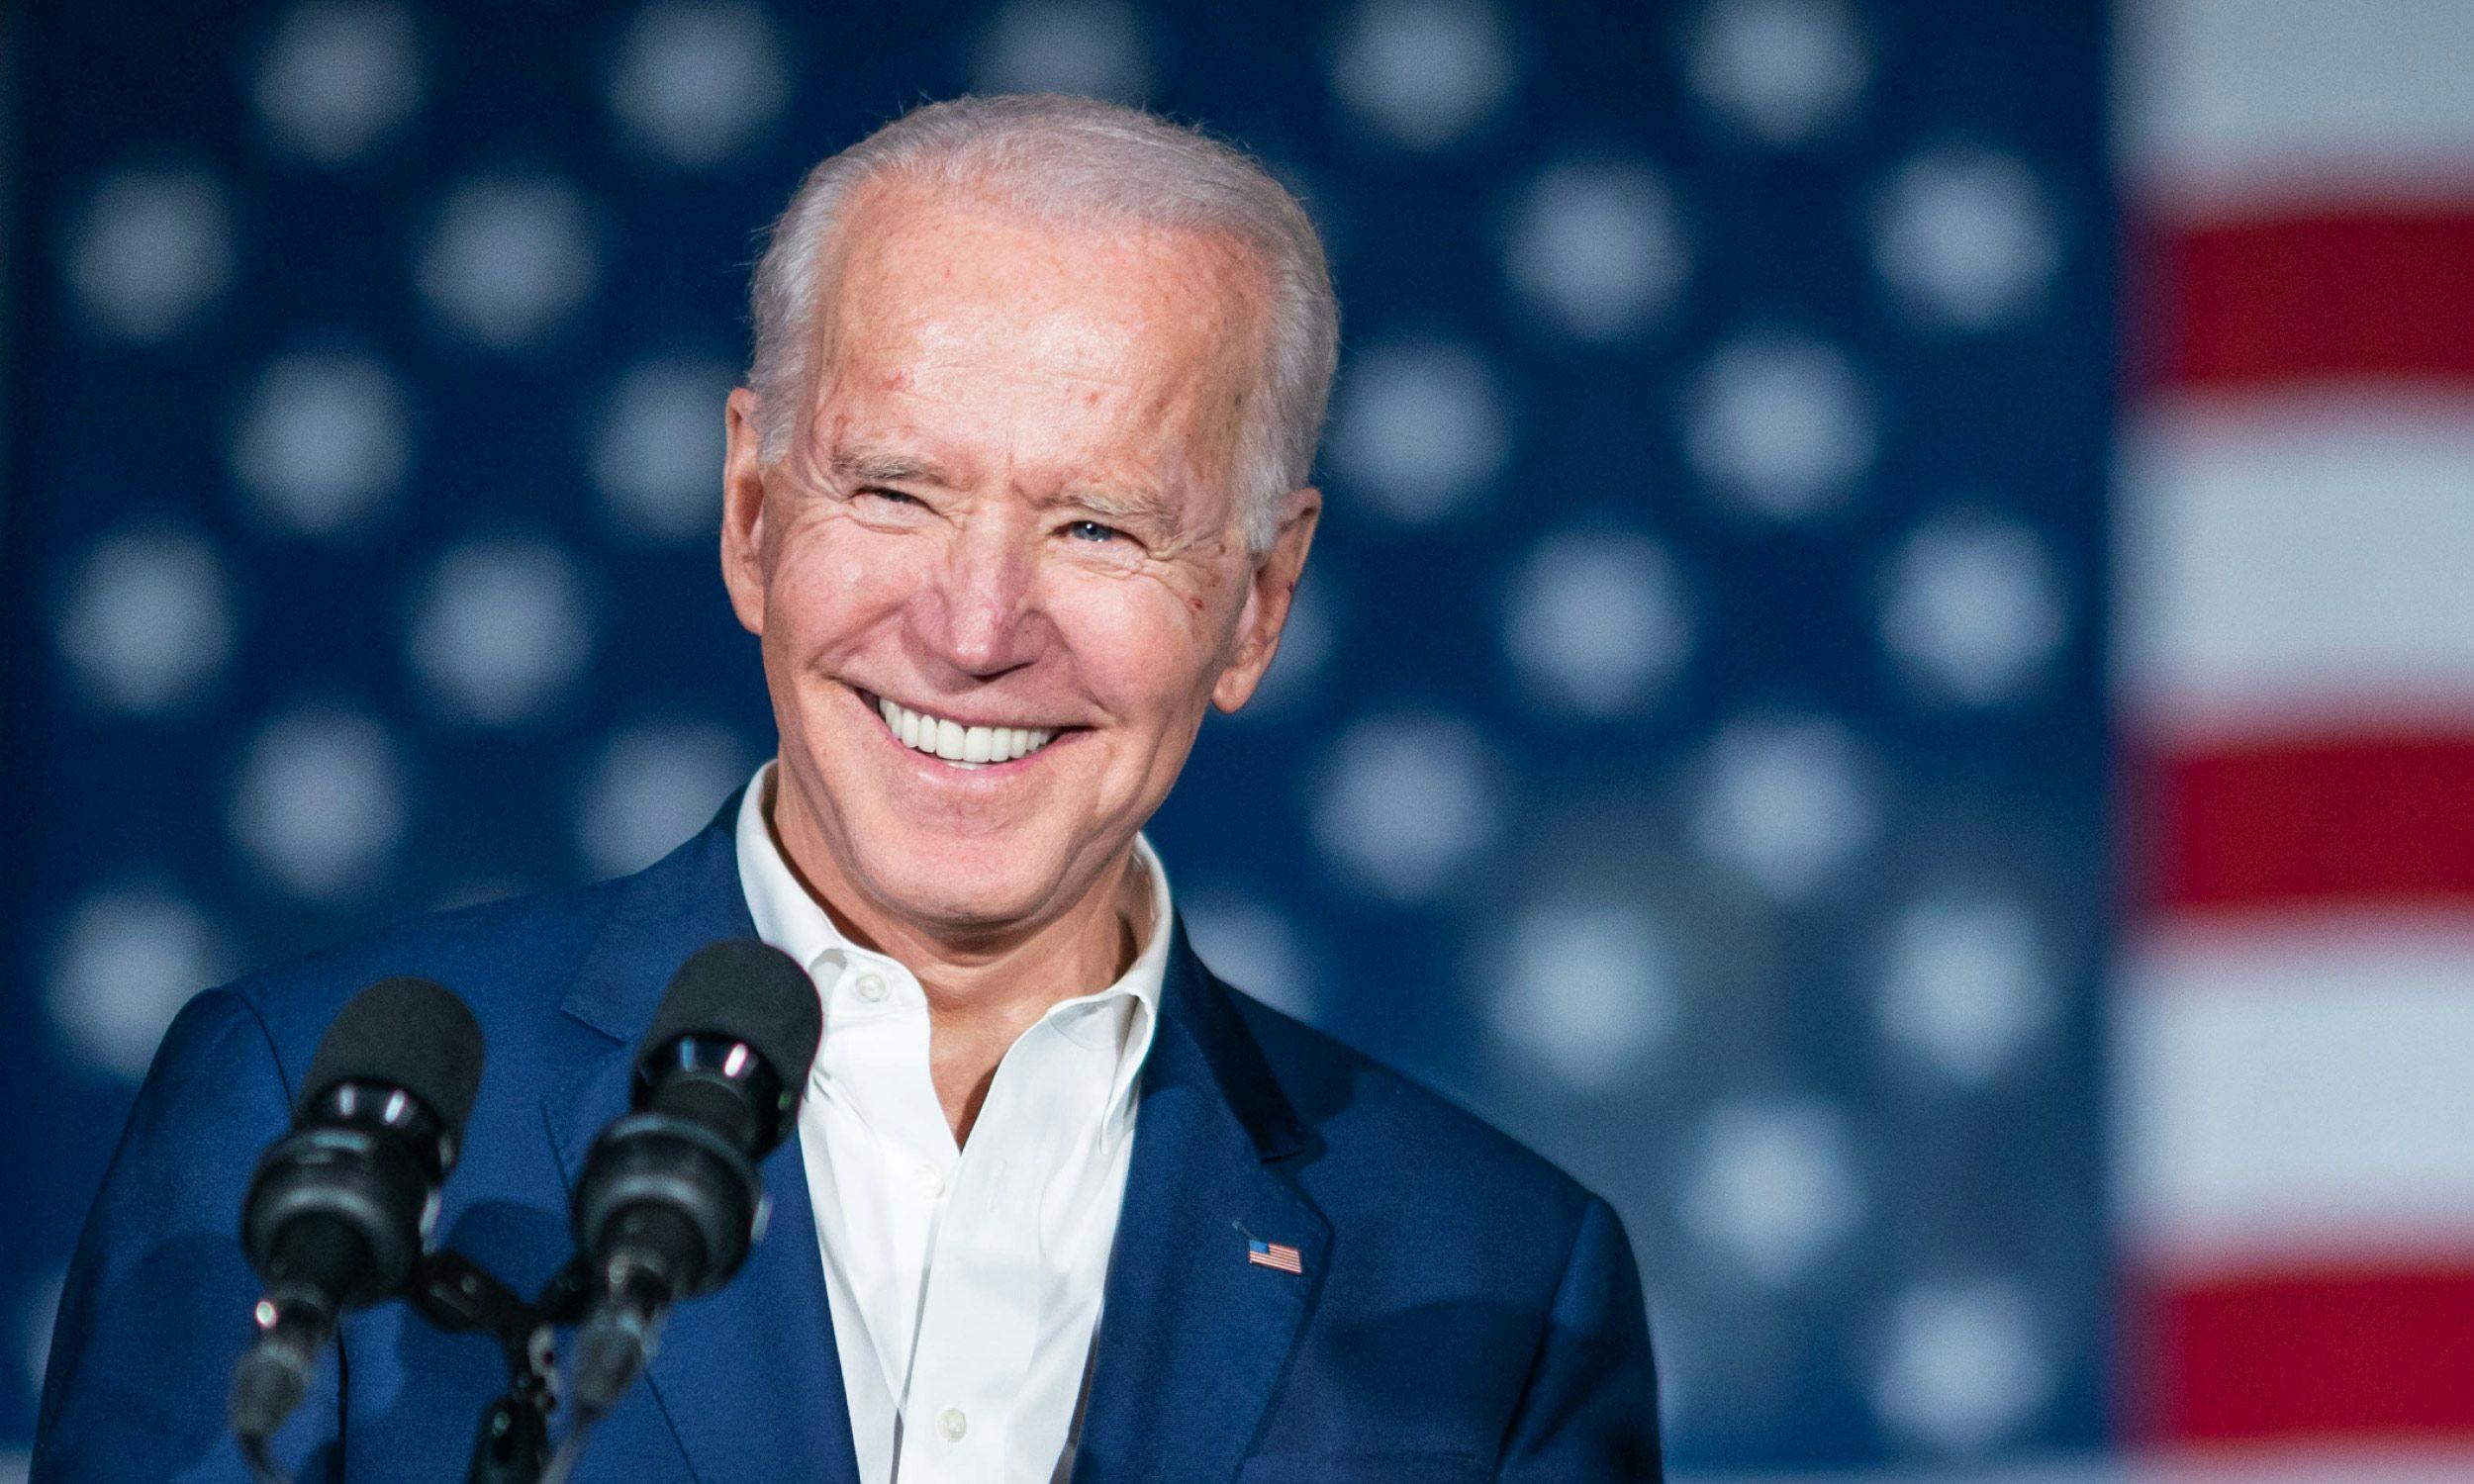 What Will CMS Do Under the Biden Administration?